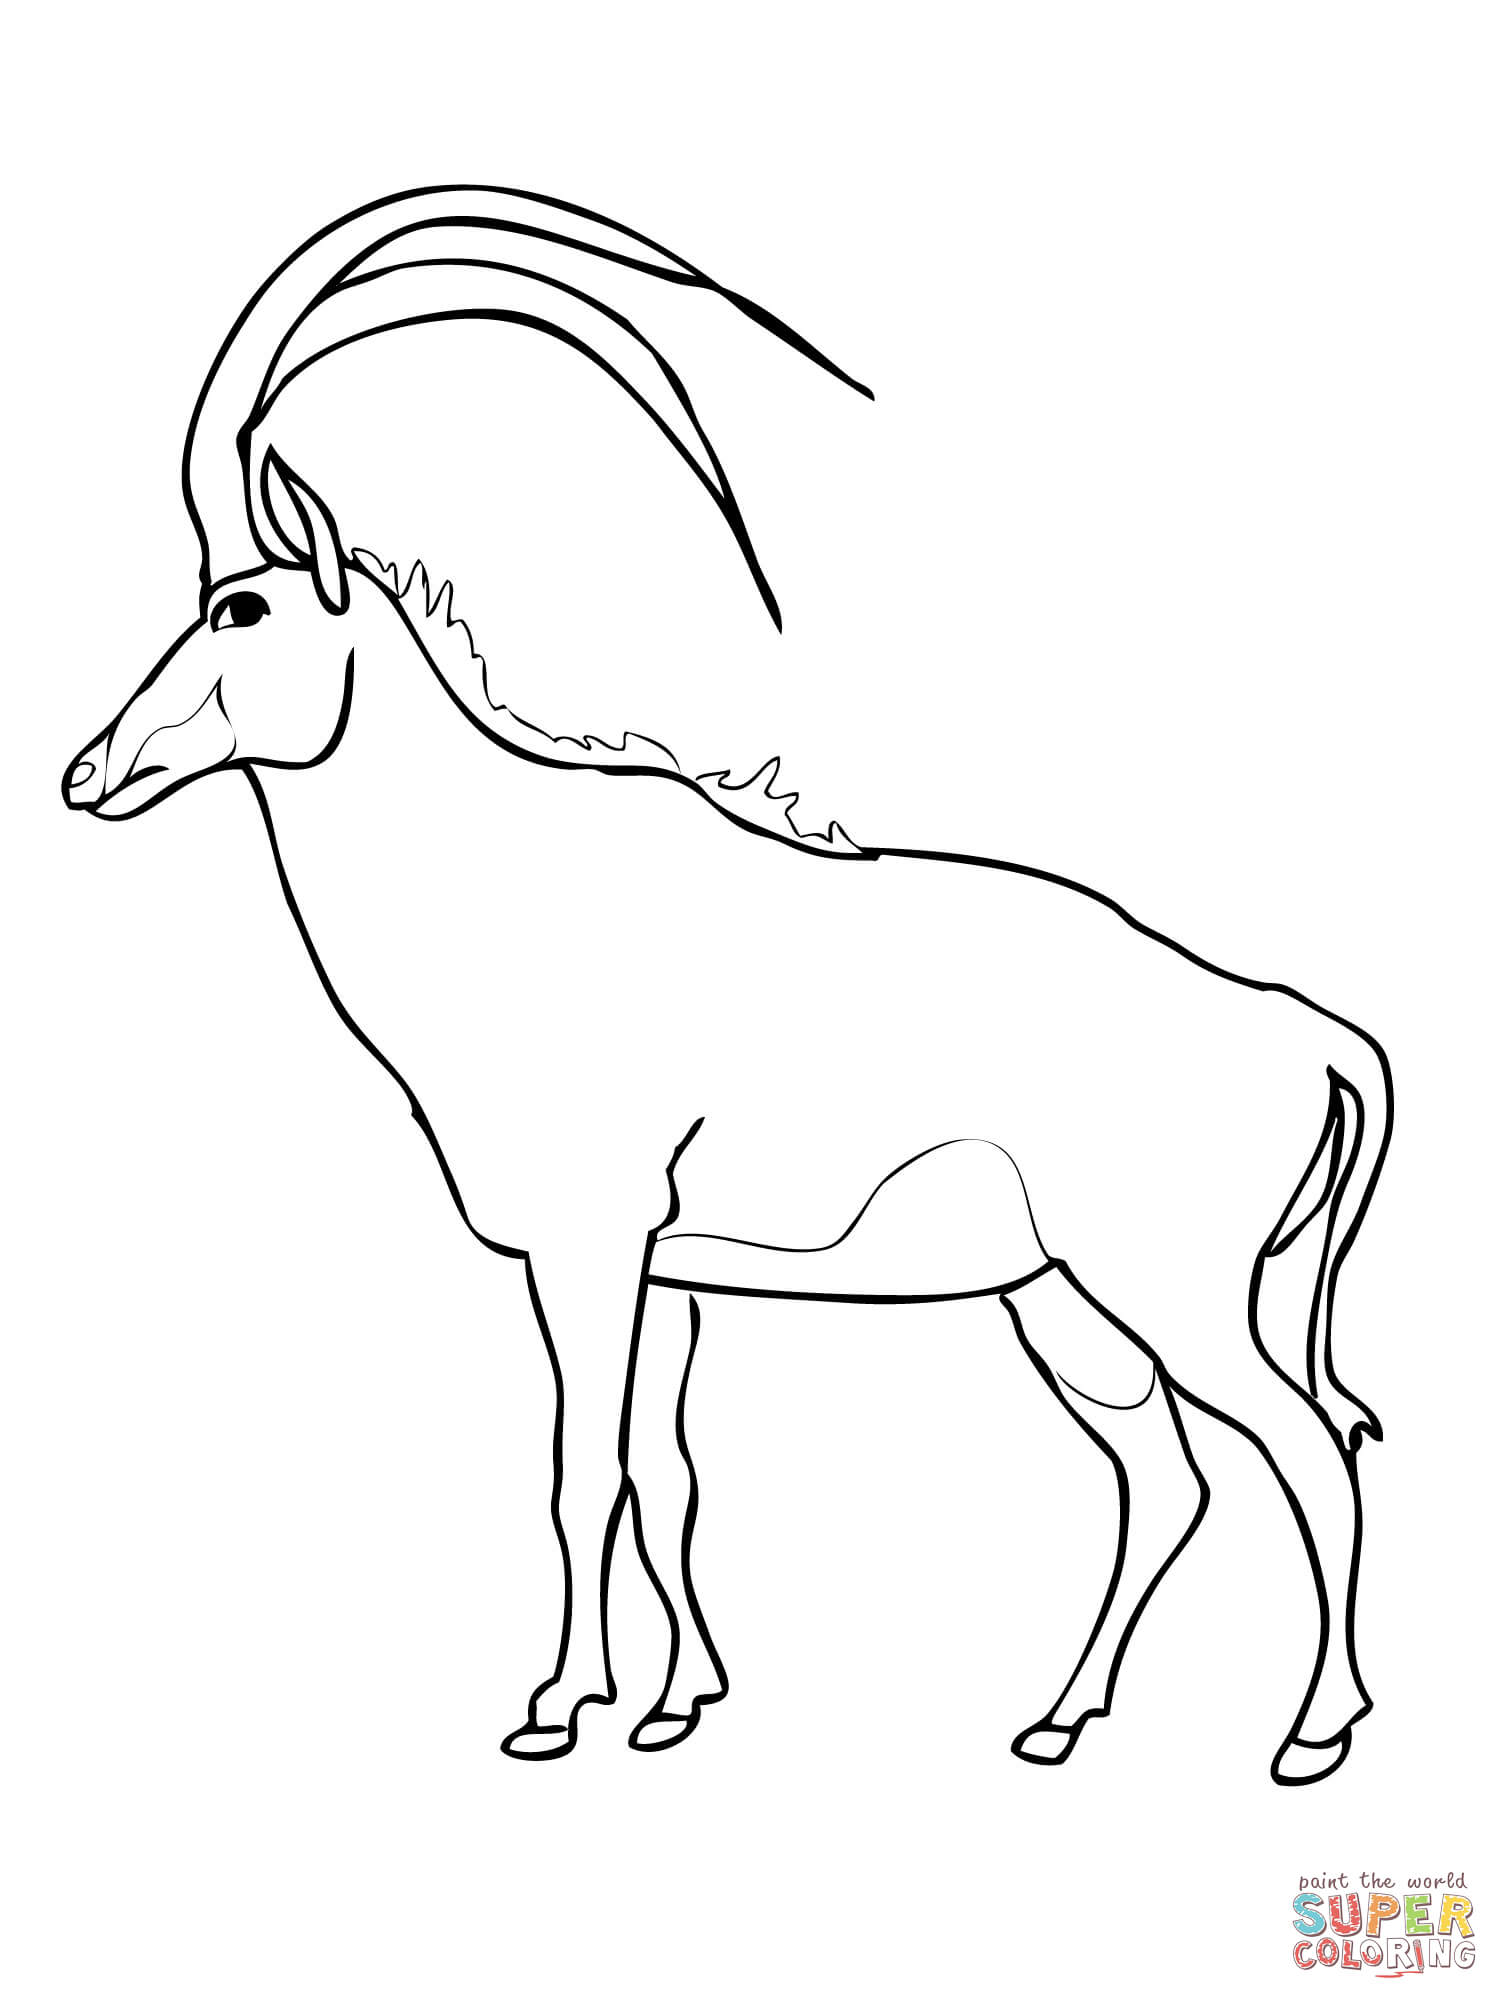 Wooded Savannah Sable Antelope coloring page | Free Printable Coloring Pages